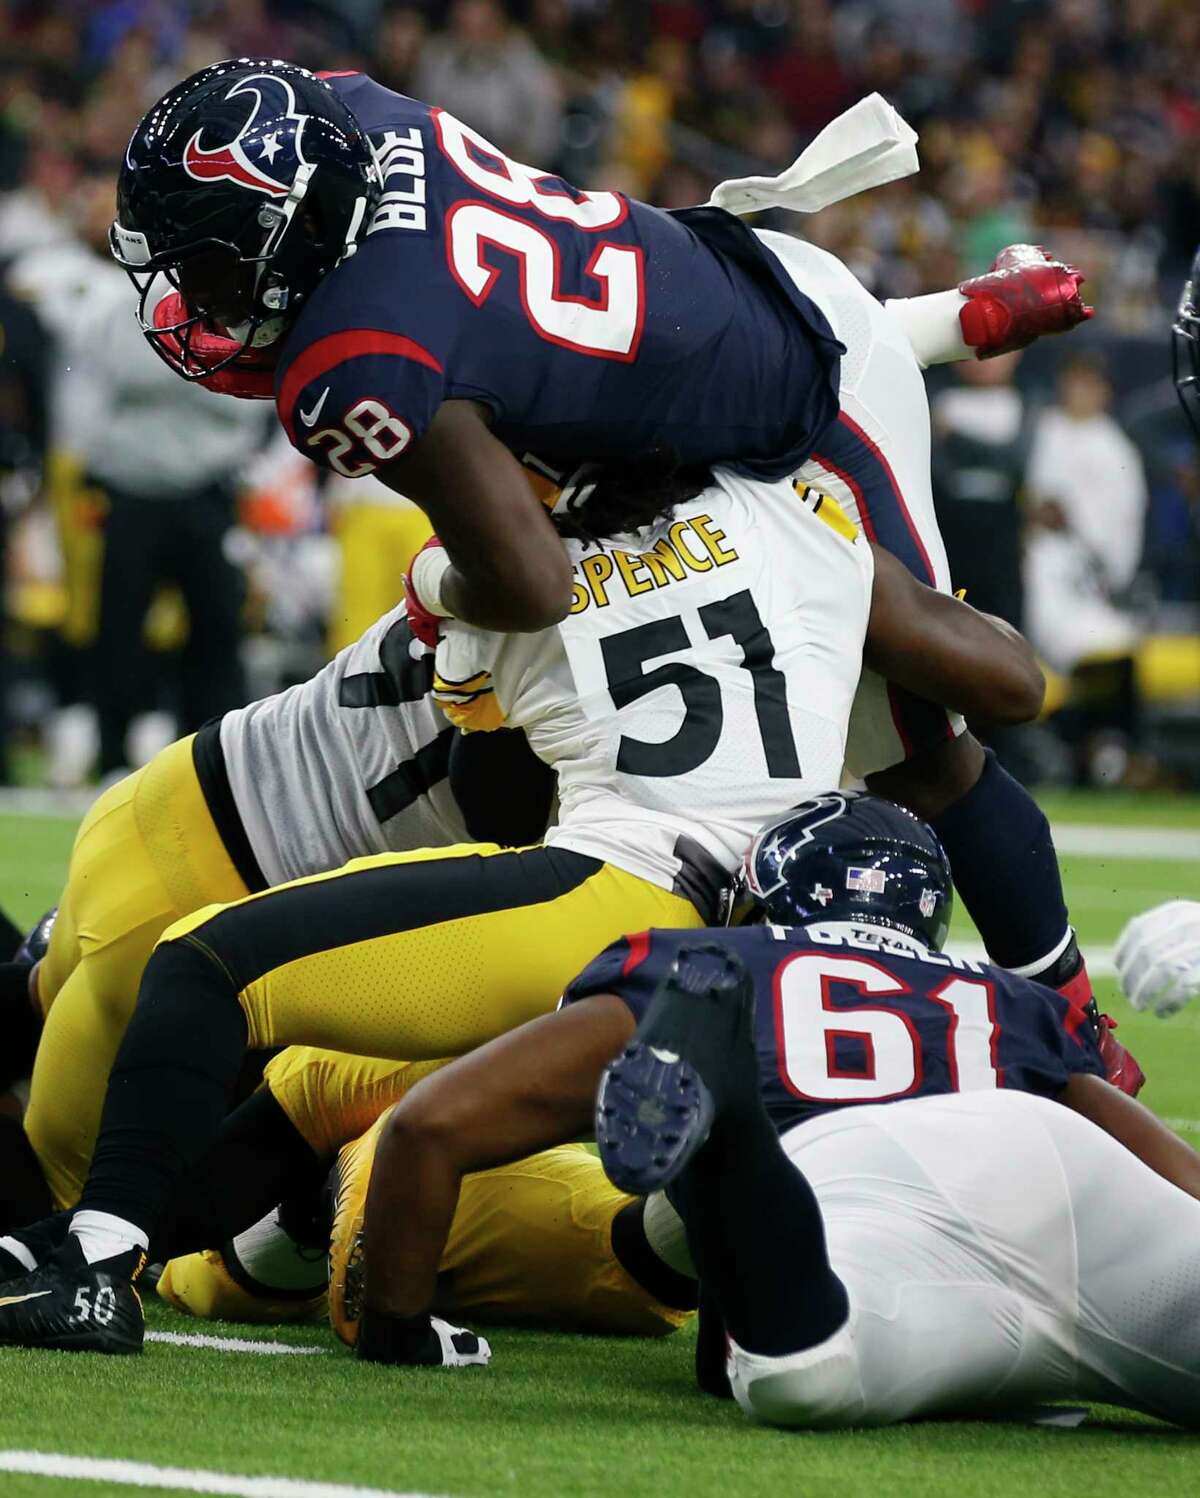 Texans running back Alfred Blue (28) is stopped short of the goal line by Steelers linebacker Sean Spence (51) during the second quarter. Blue carried 16 times for game-high 108 yards.